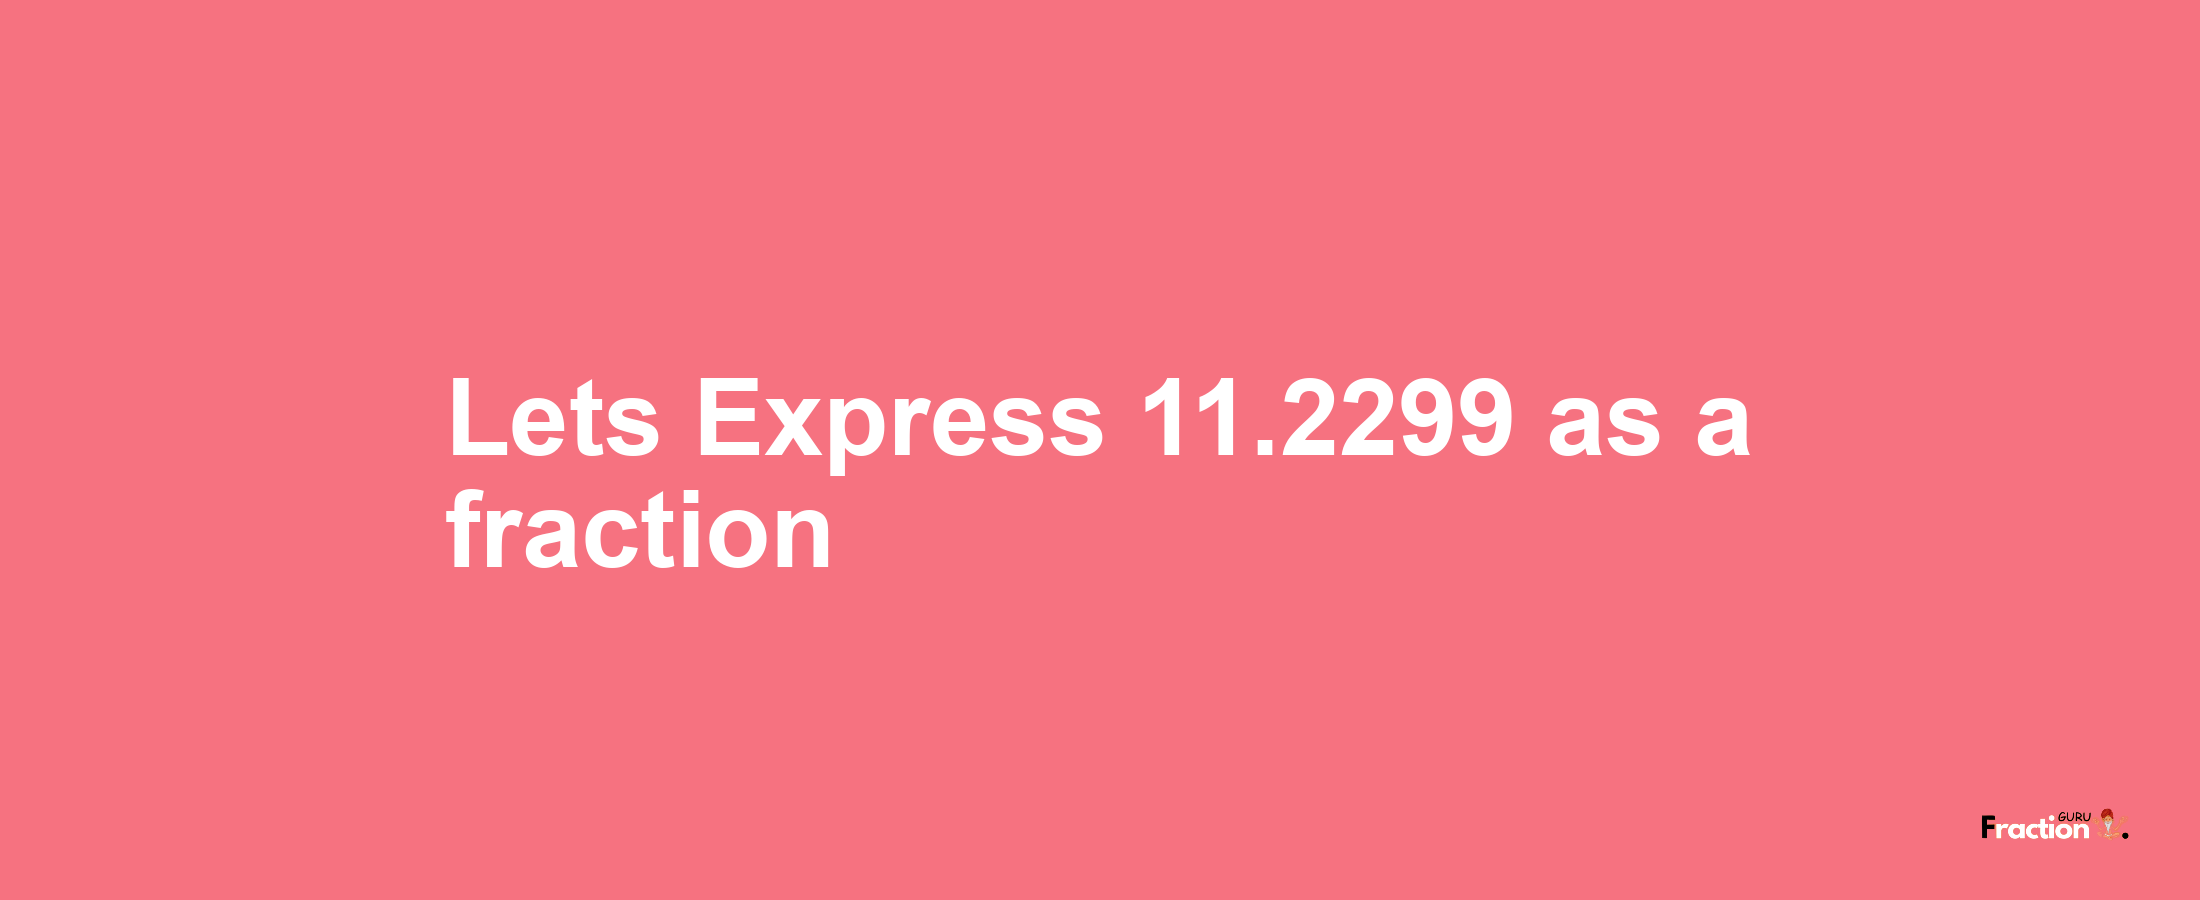 Lets Express 11.2299 as afraction